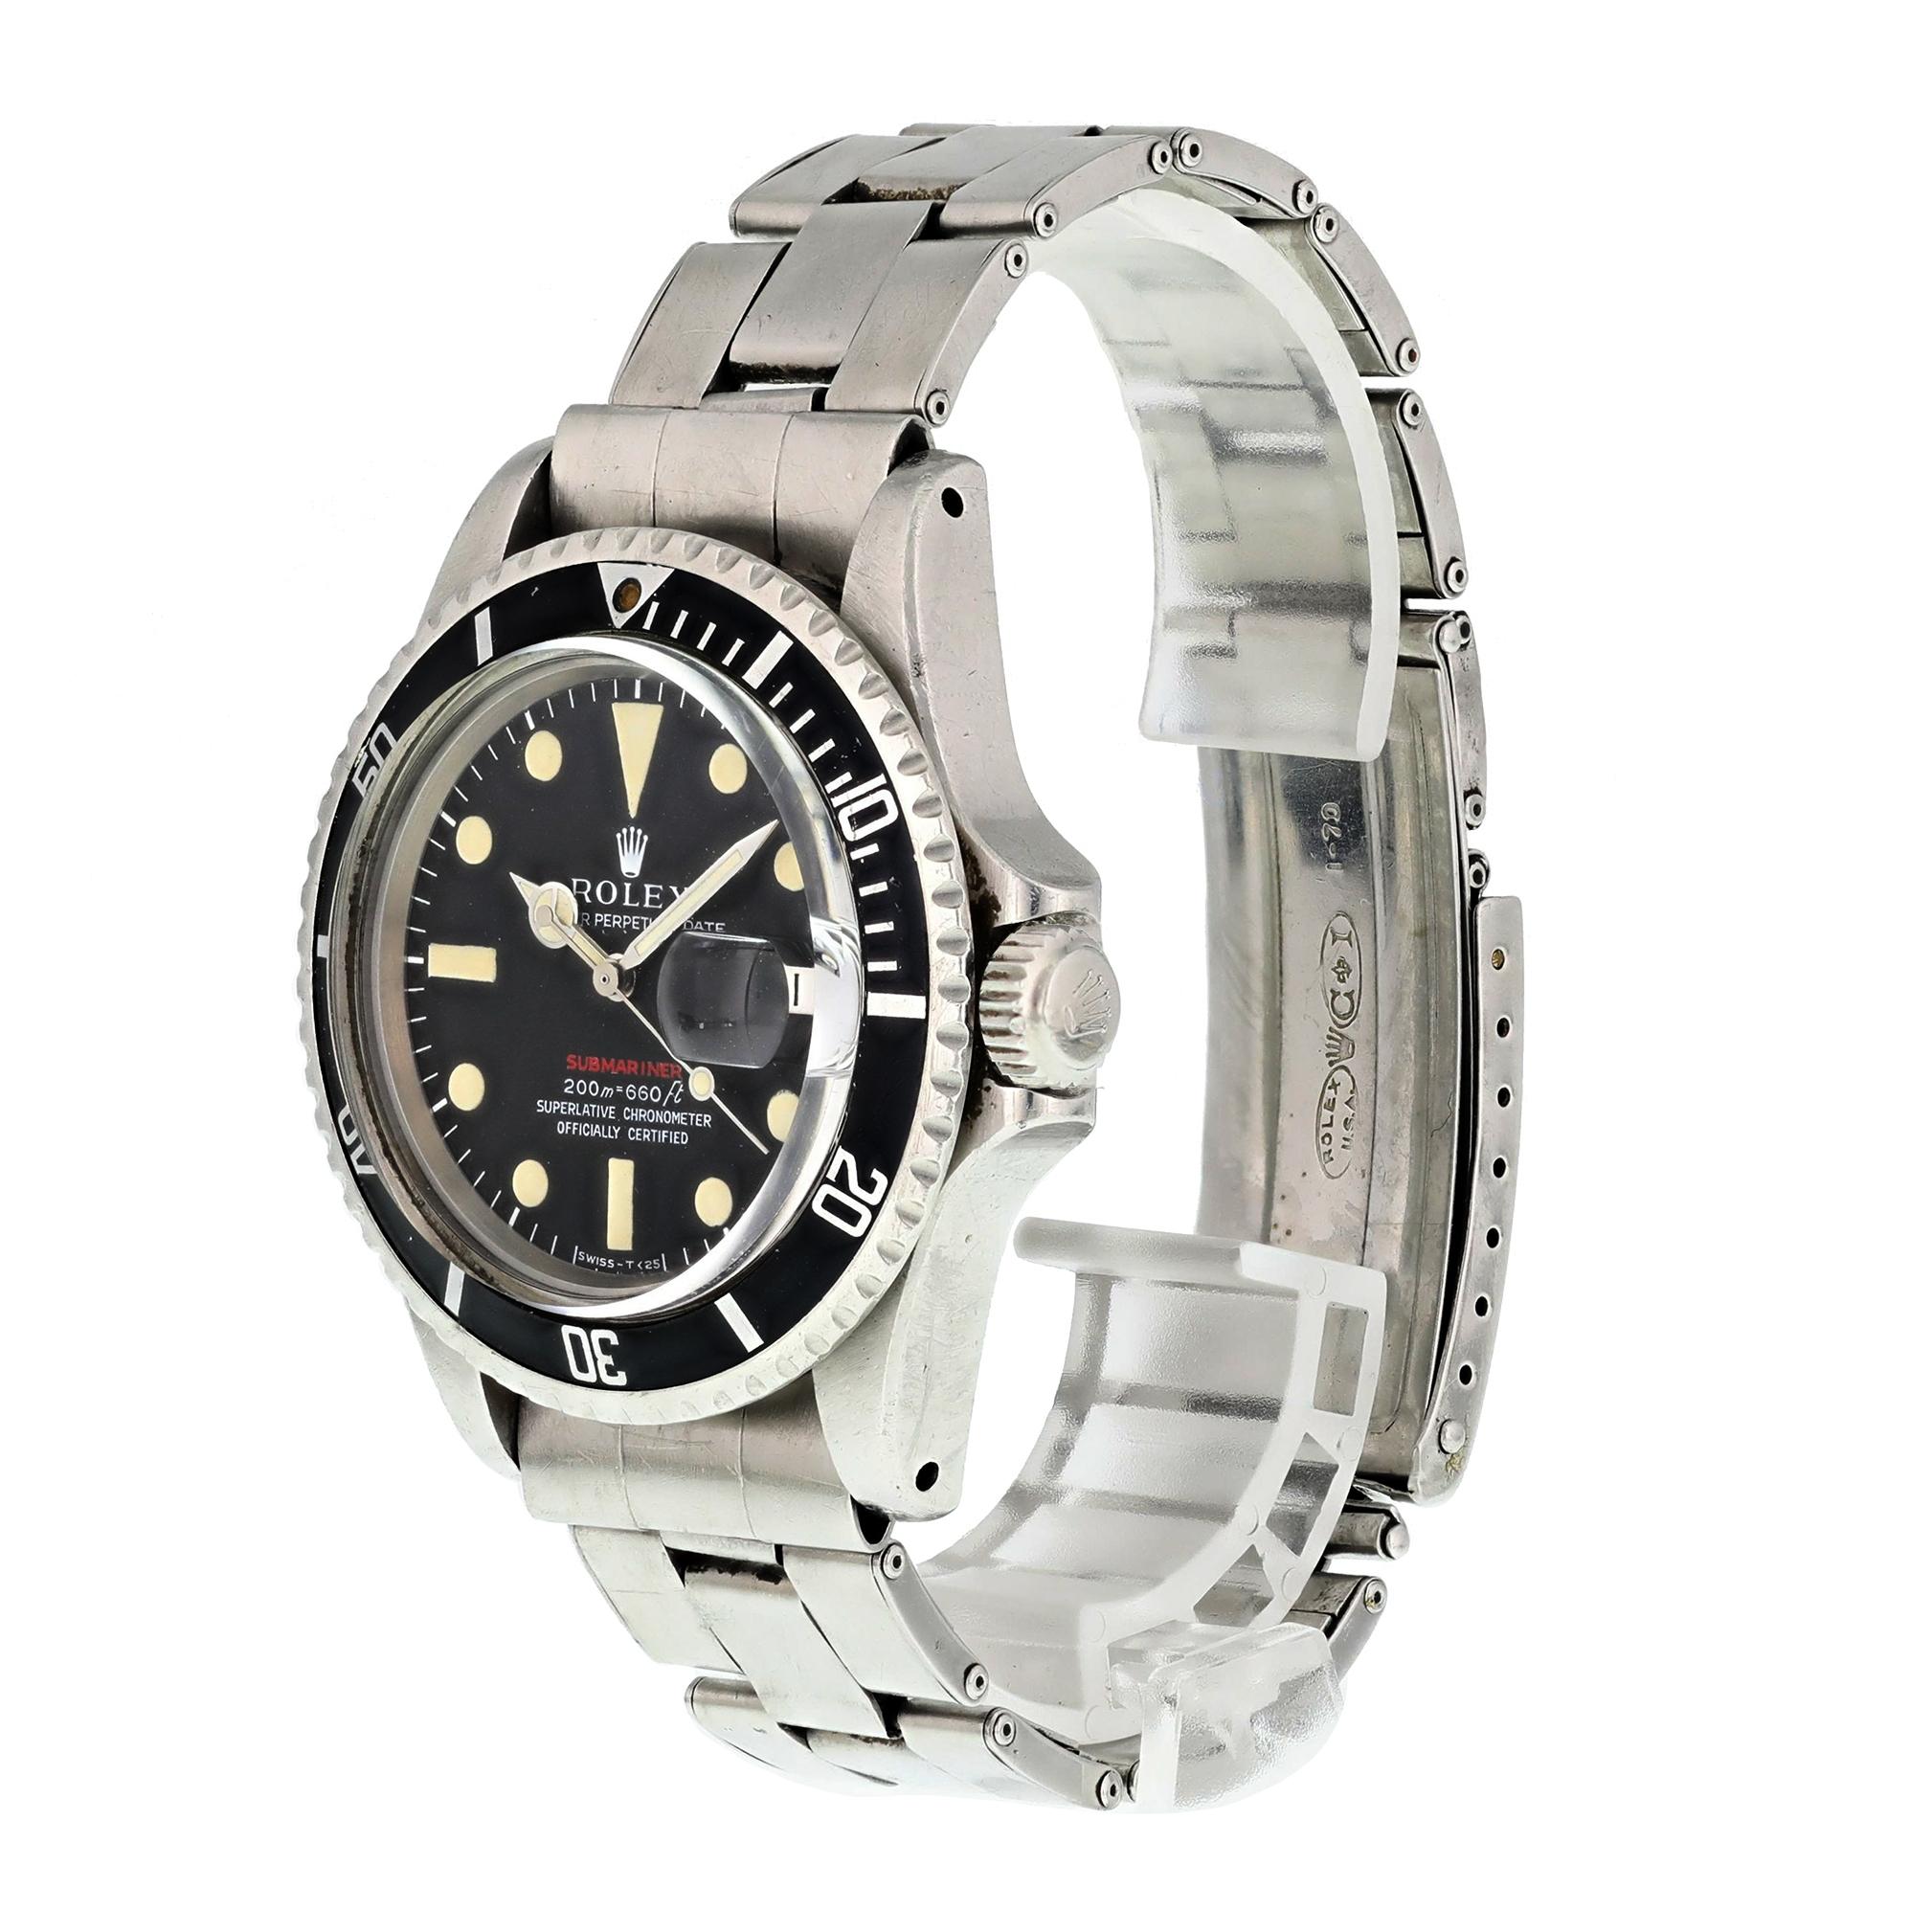 Rolex Submariner 1680 Meters First Vintage Men's Watch with Papers In Excellent Condition For Sale In New York, NY